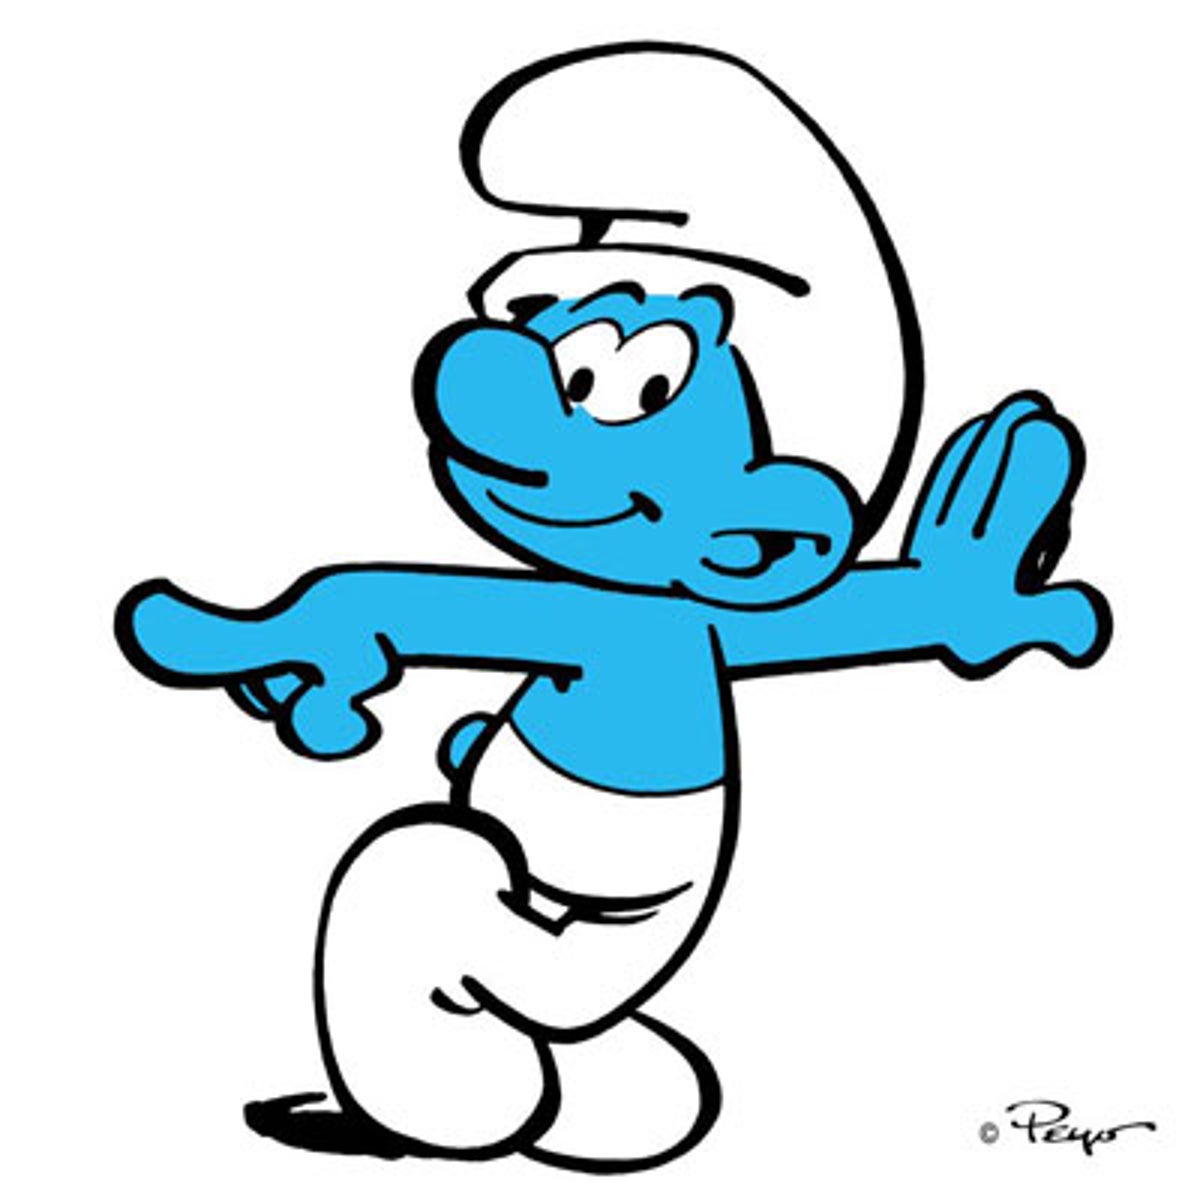 aasma patel recommends A Picture Of A Smurf